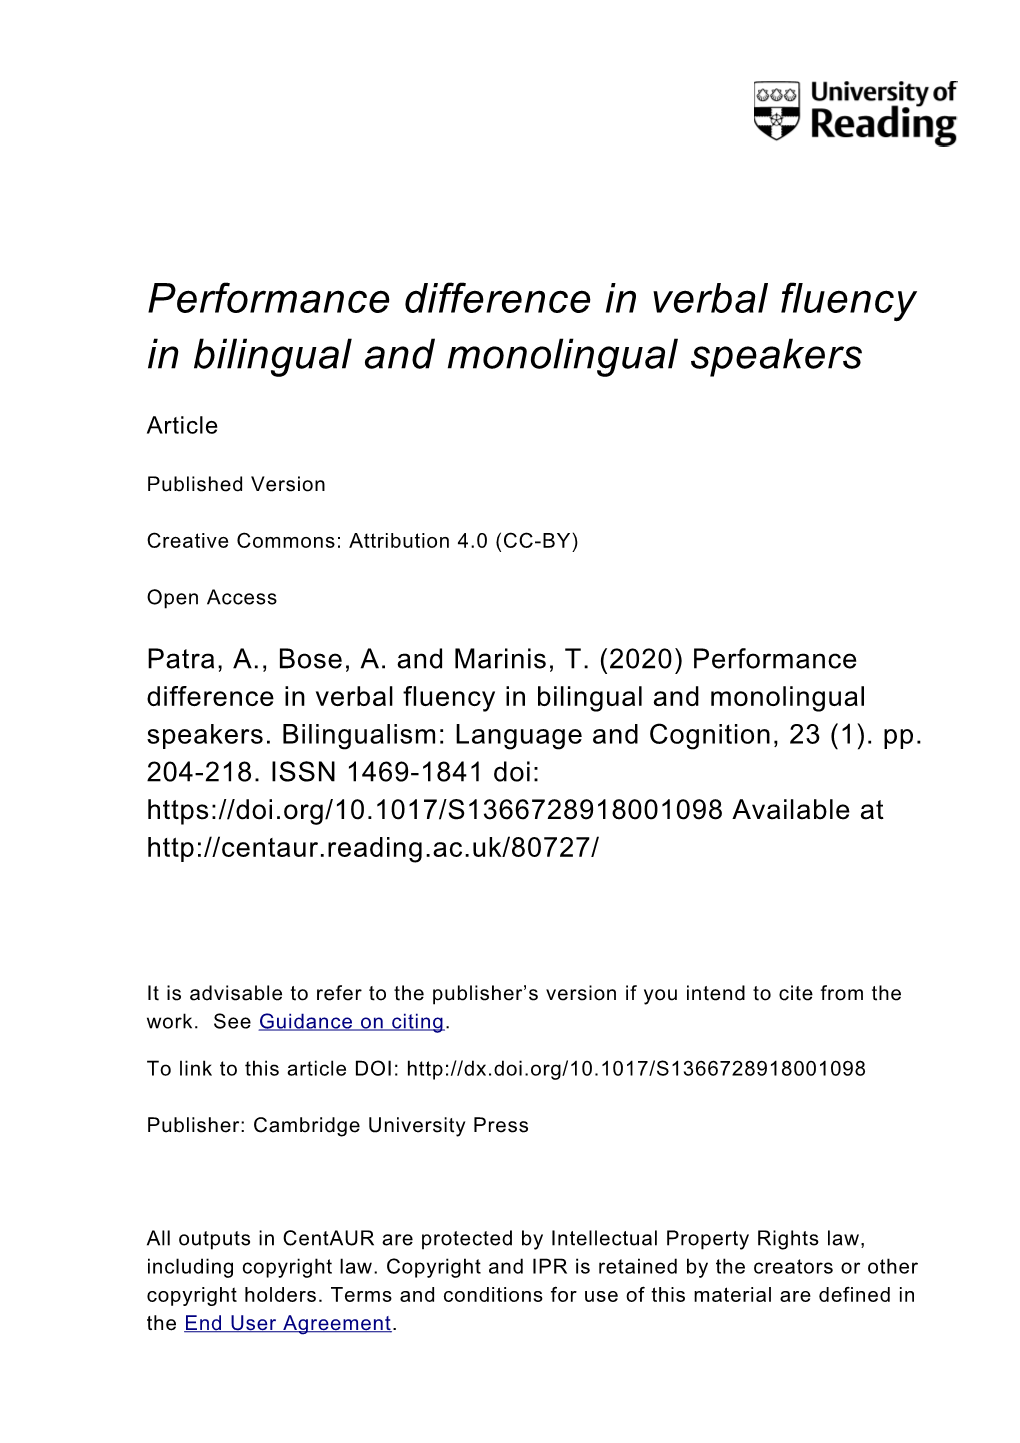 Performance Difference in Verbal Fluency in Bilingual and Monolingual Speakers